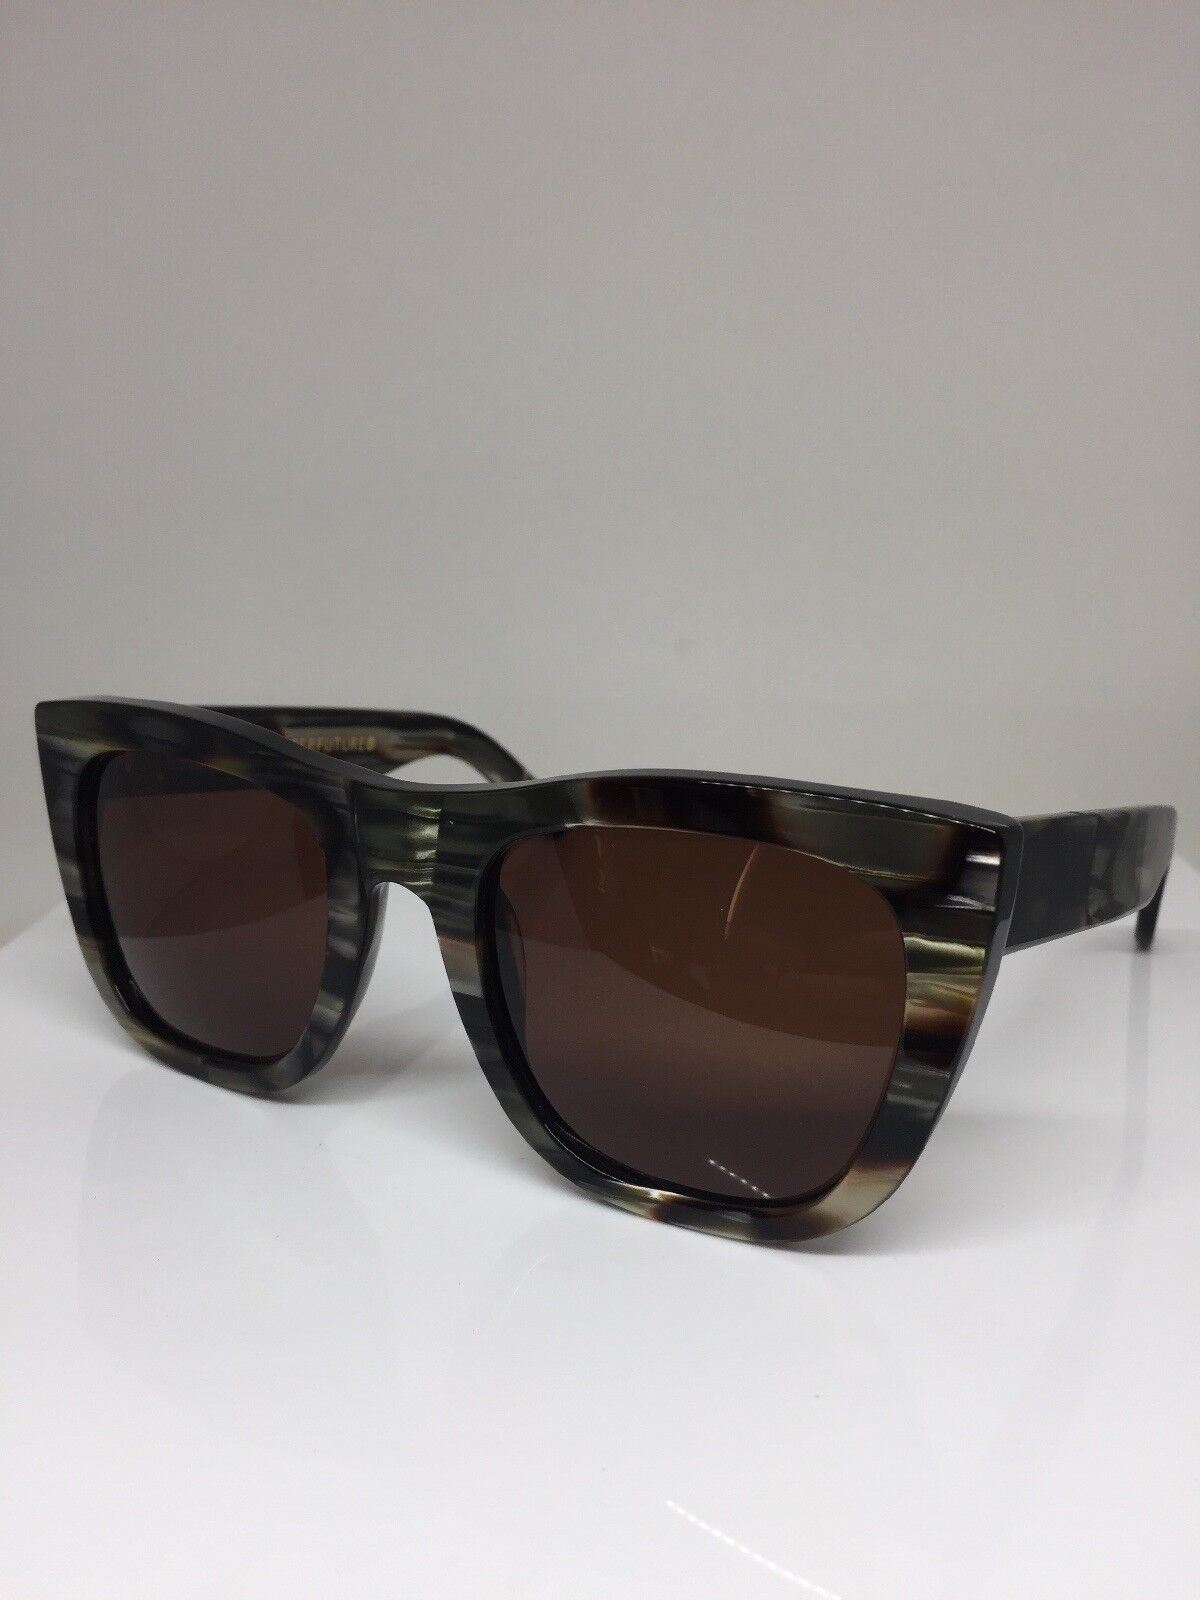 Retrosuperfuture SUPER Gals Sunglasses C. Marble Brown 52-22mm Hand Made Italy